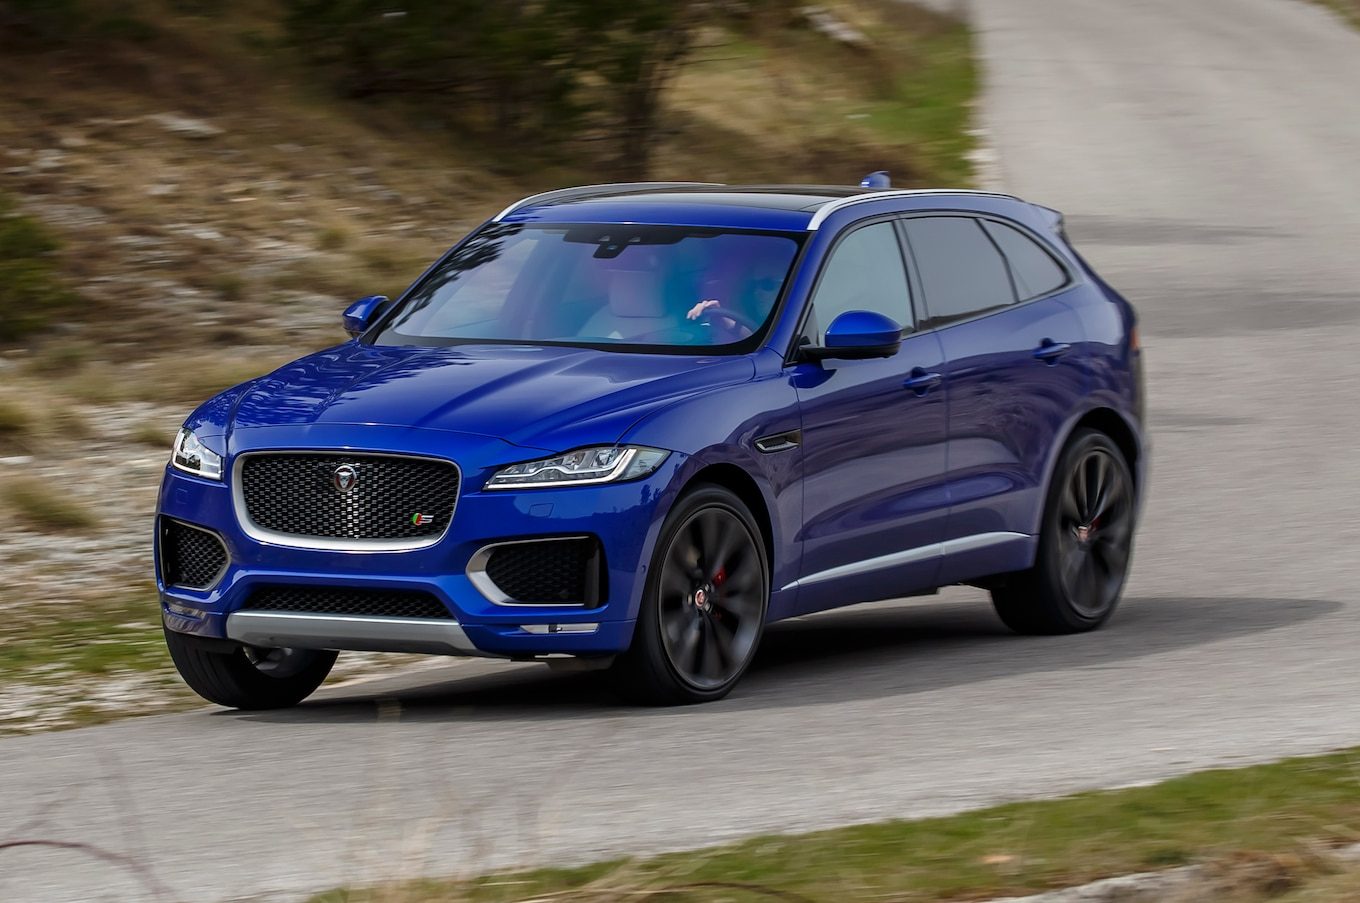 2017-Jaguar-F-Pace-First-Edition-in-motion.jpg